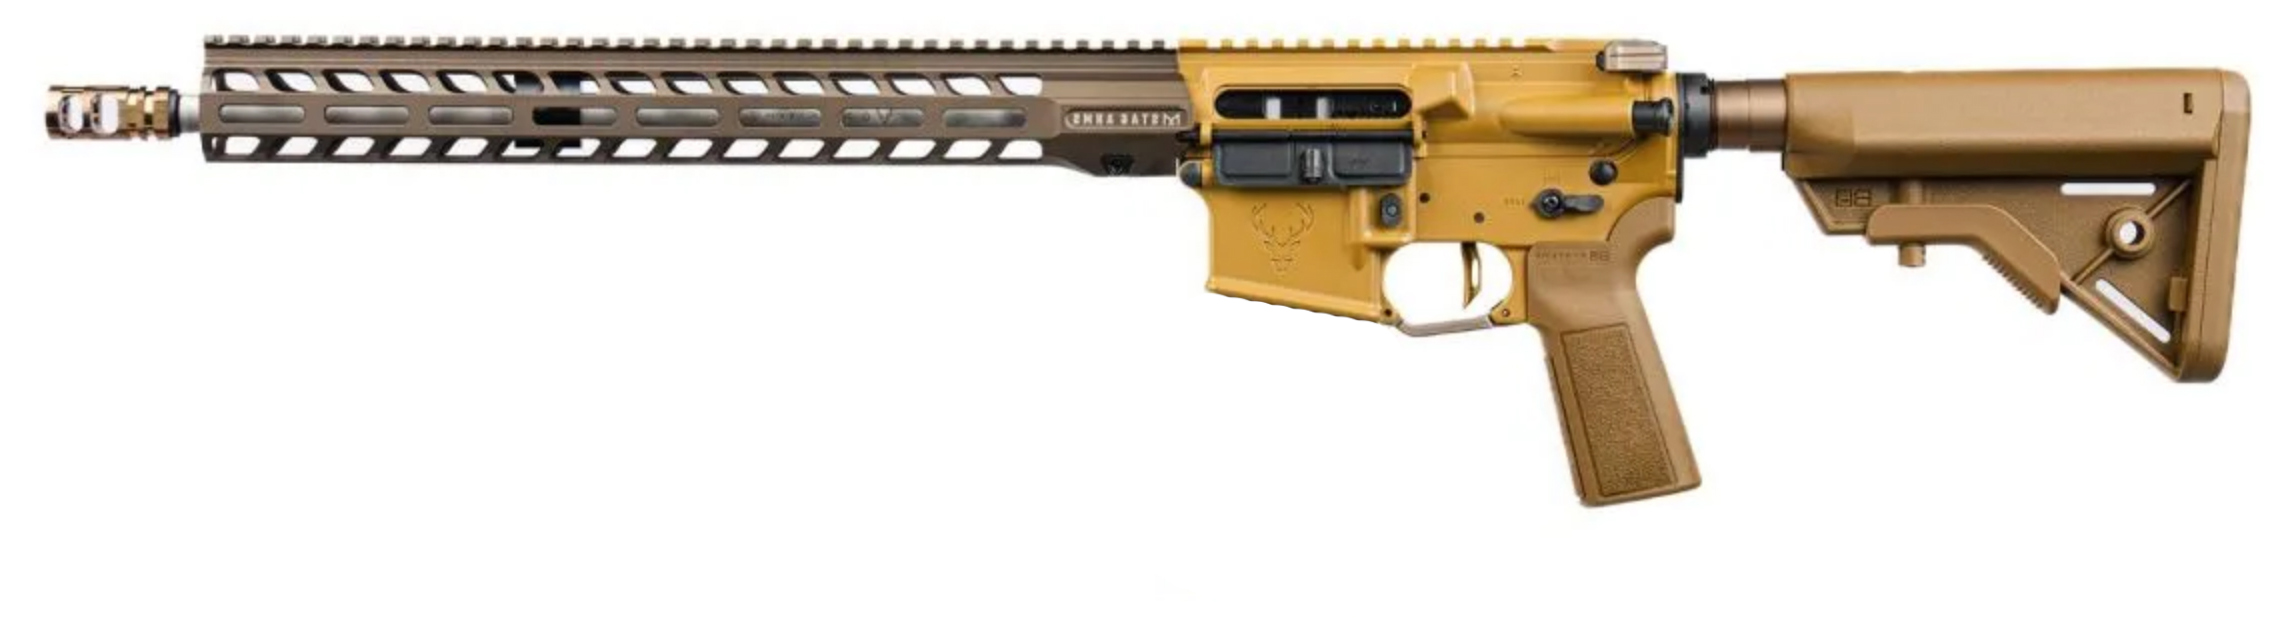 STAG 15 PROJECT SPCTRM 223WYLDE 16" FDE SS LH